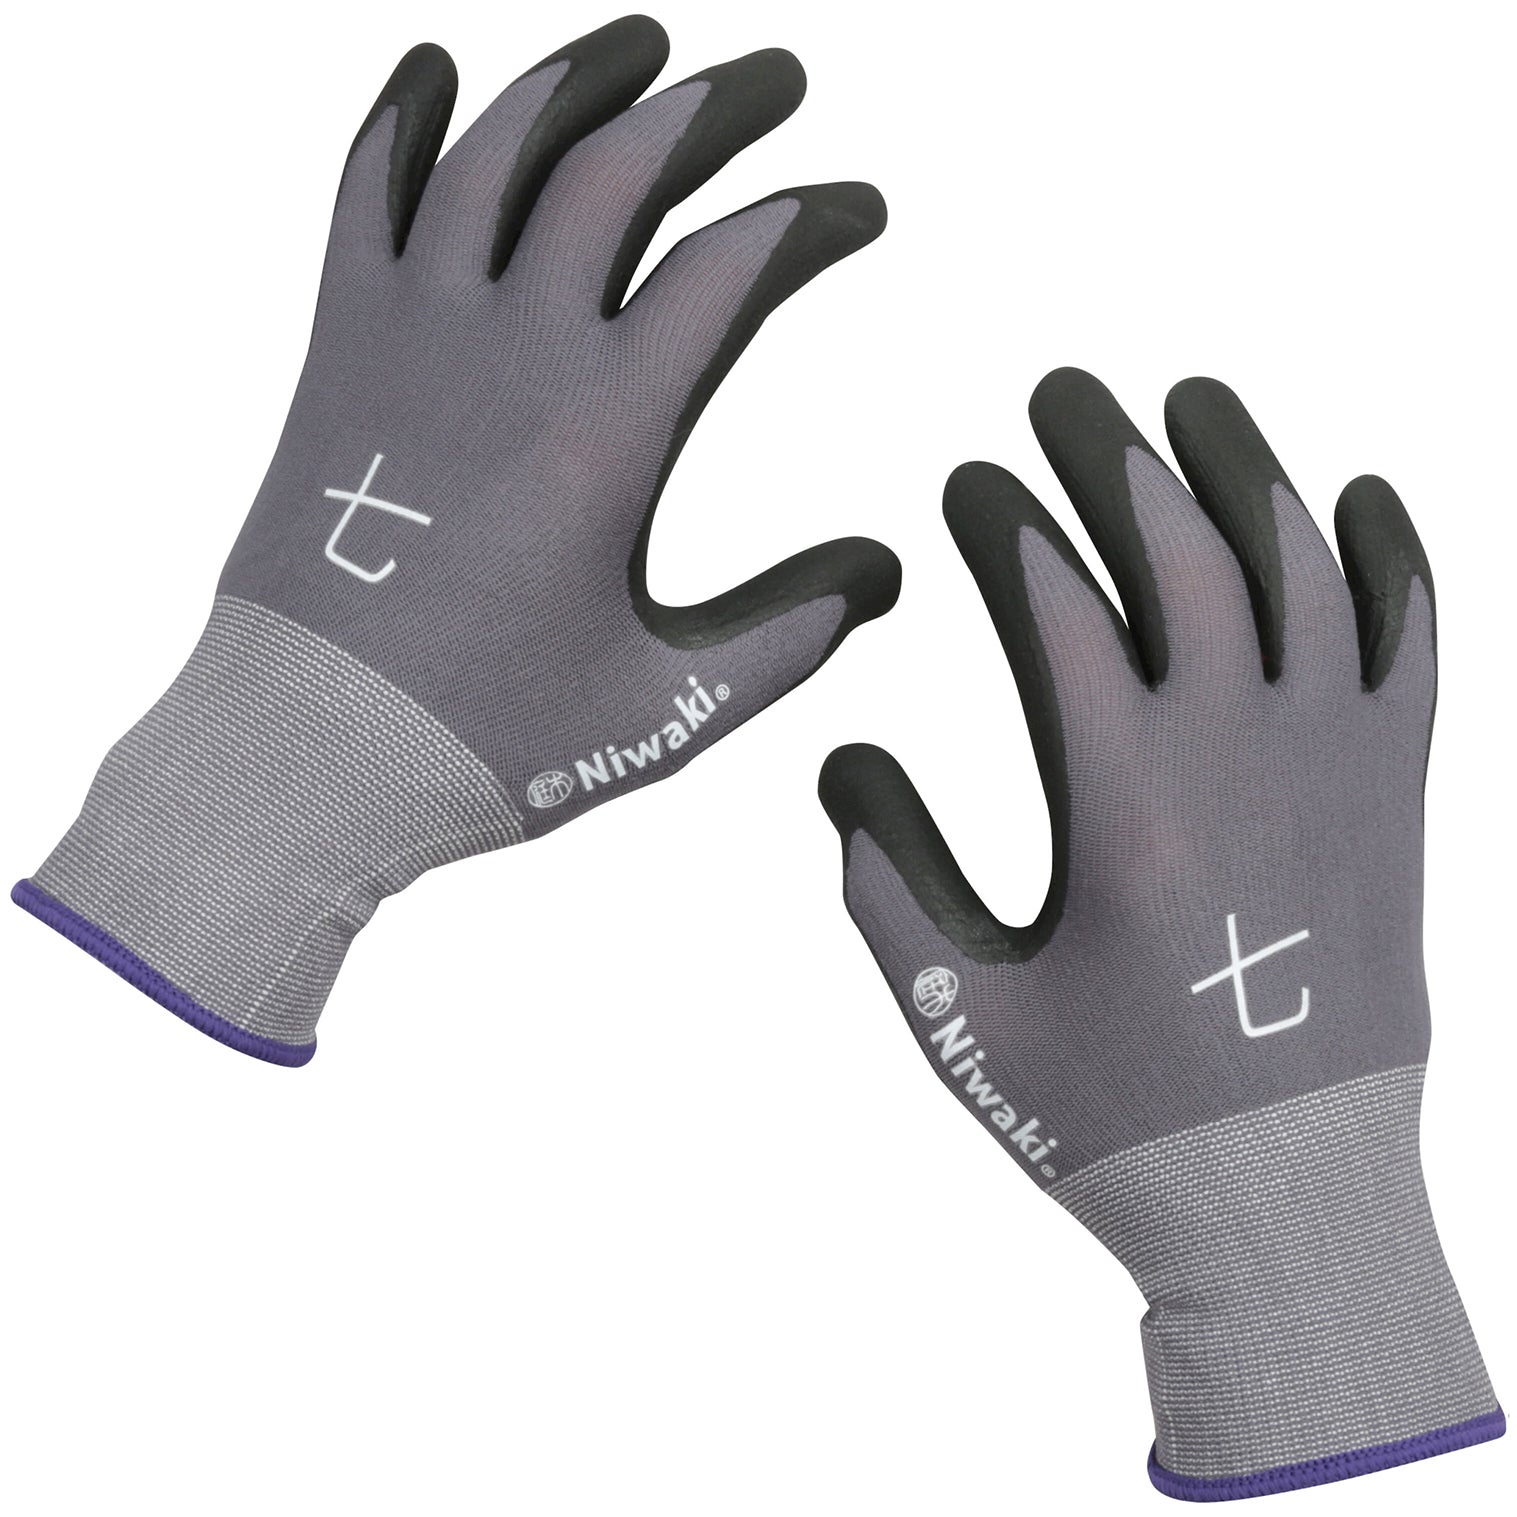 Gardening Gloves - Small with Purple Cuff